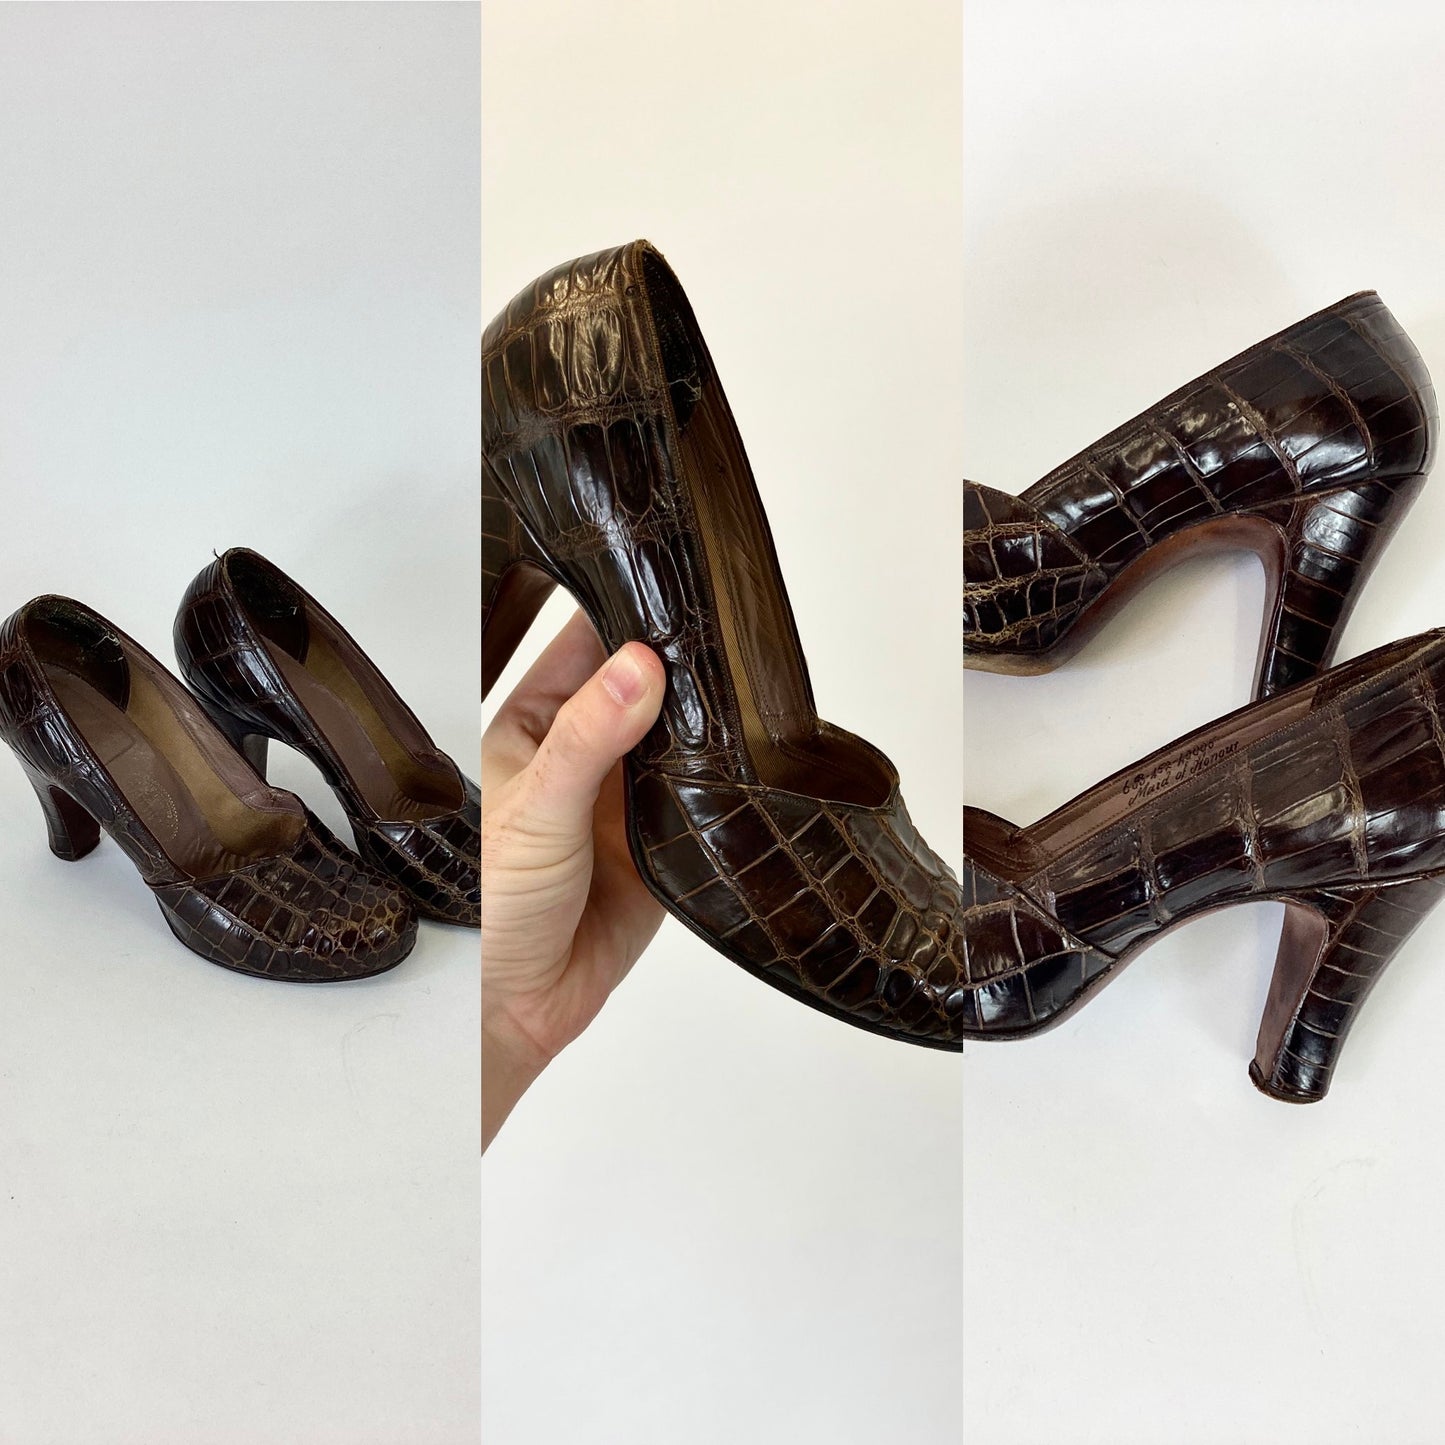 Original 40's Faux Alligator Shoes - in Chocolate Brown